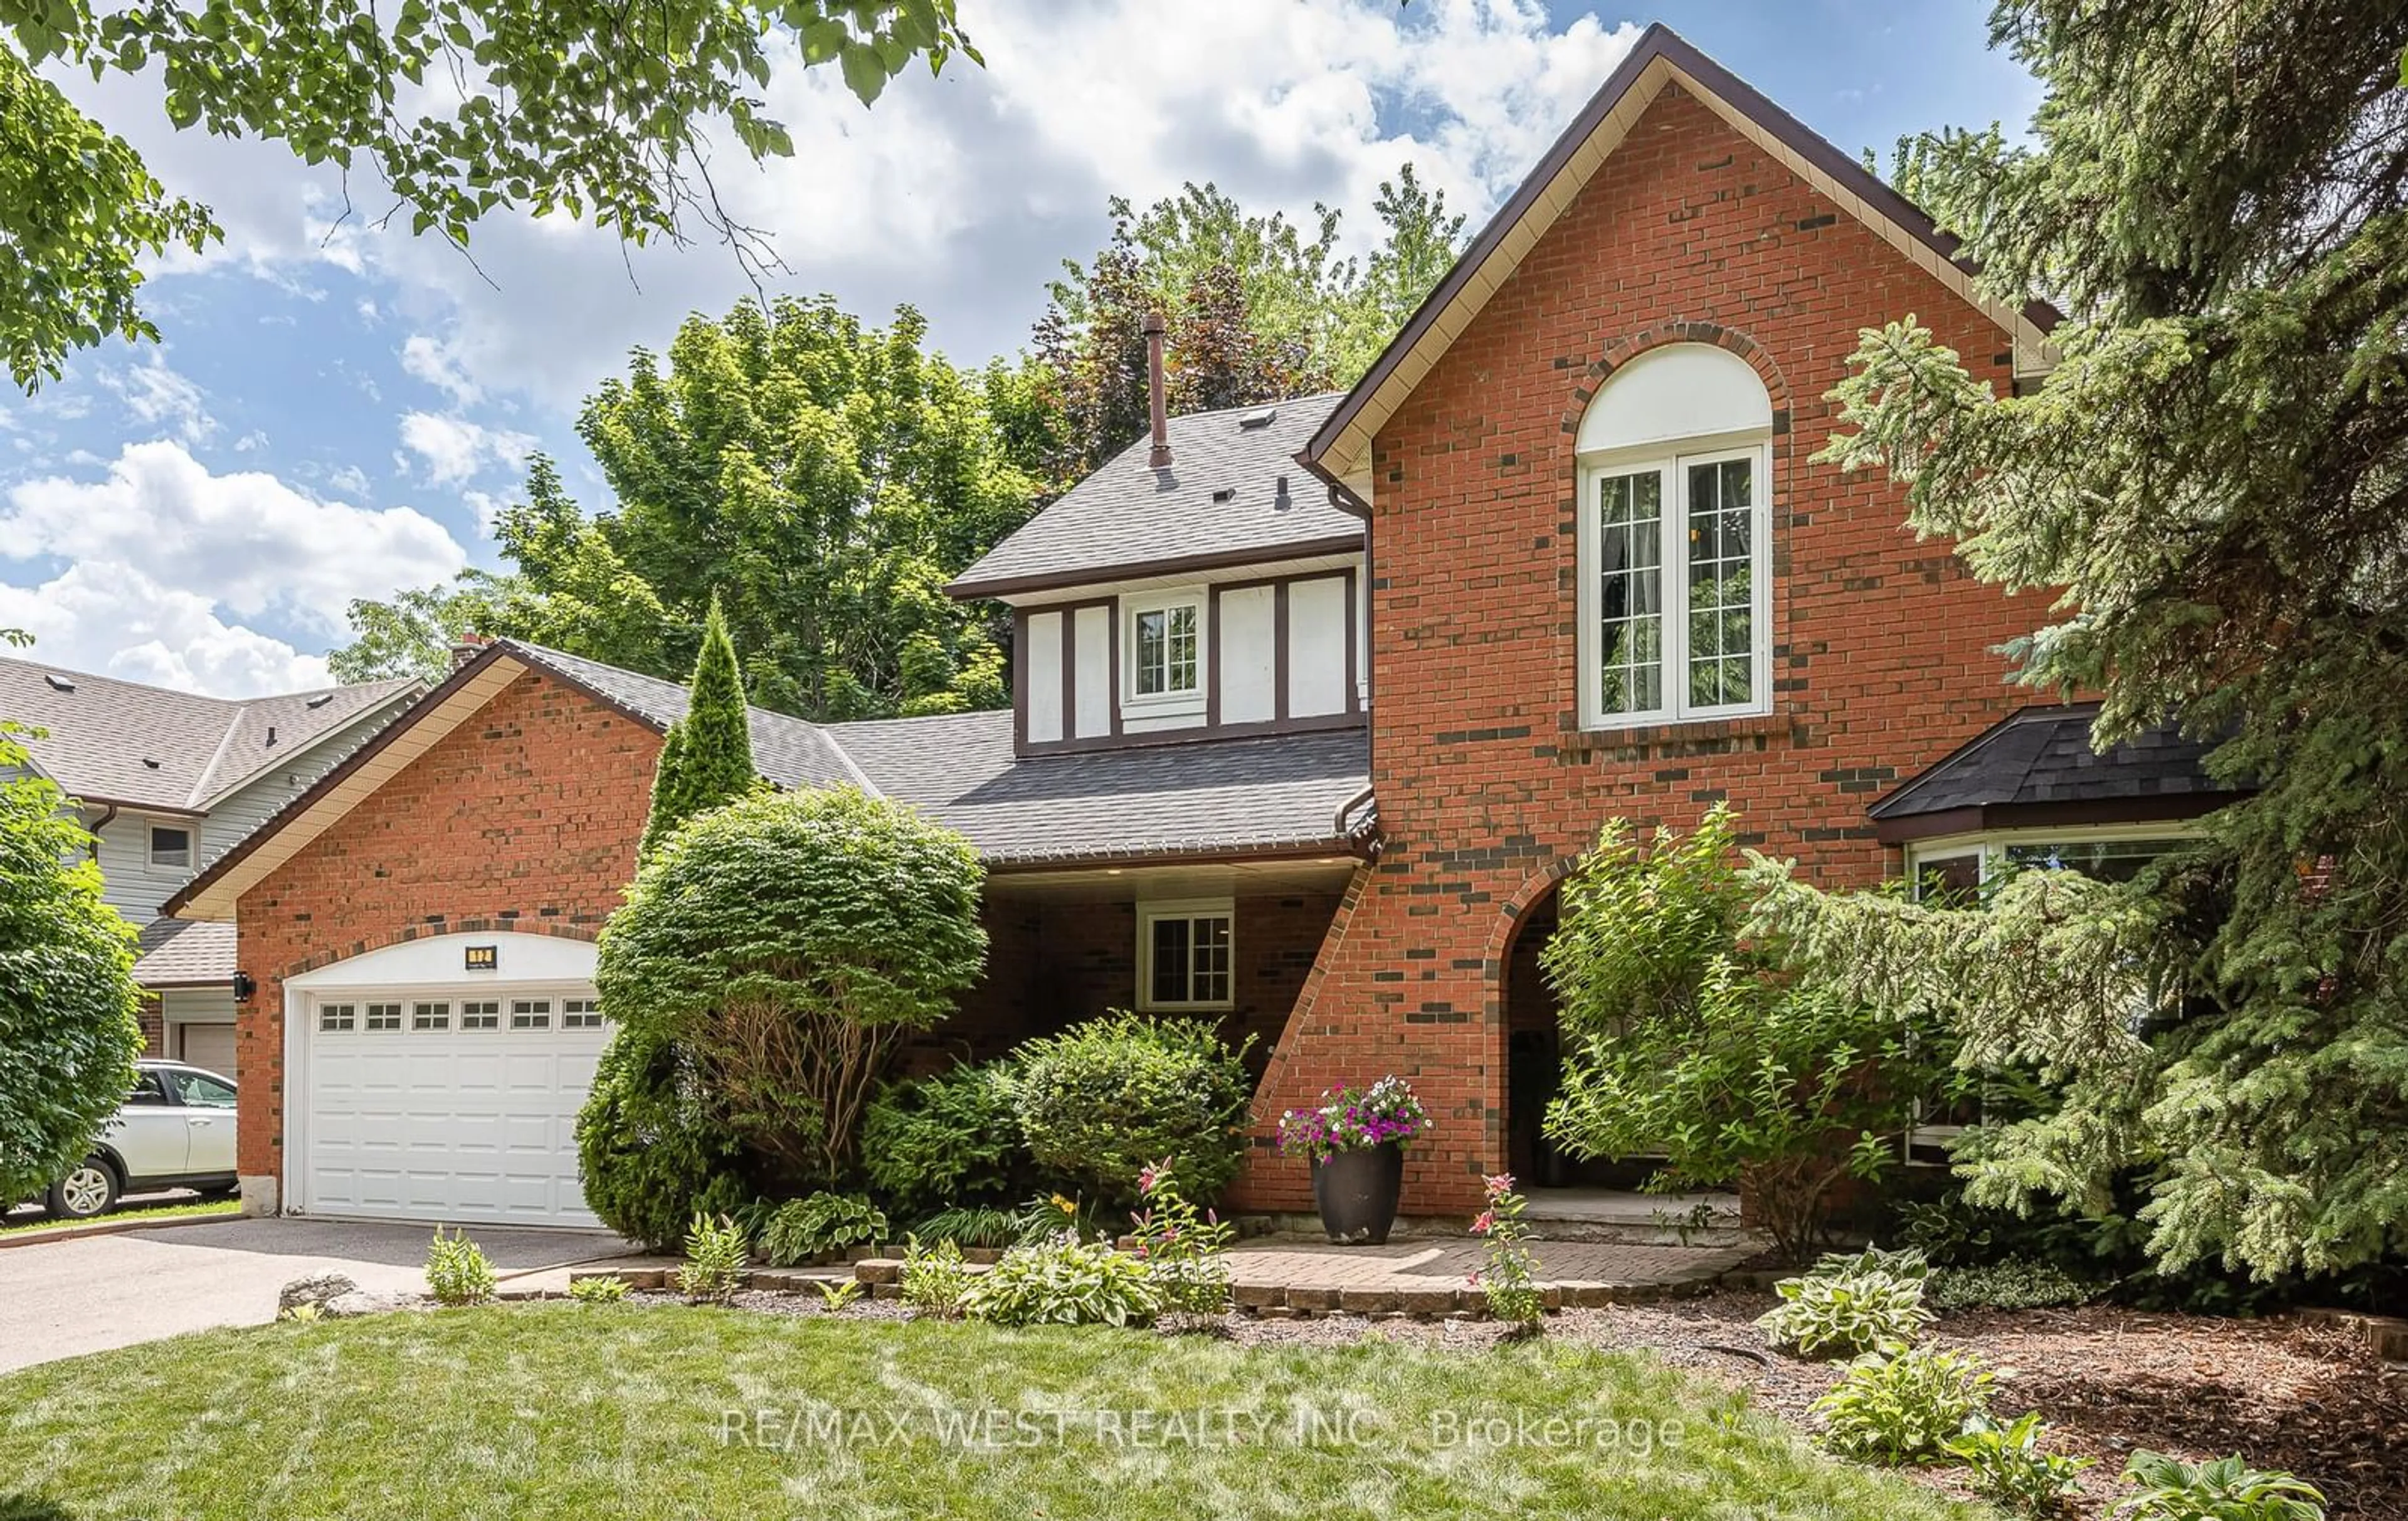 Home with brick exterior material for 12 Axminster Rd, Brampton Ontario L6Z 1T1